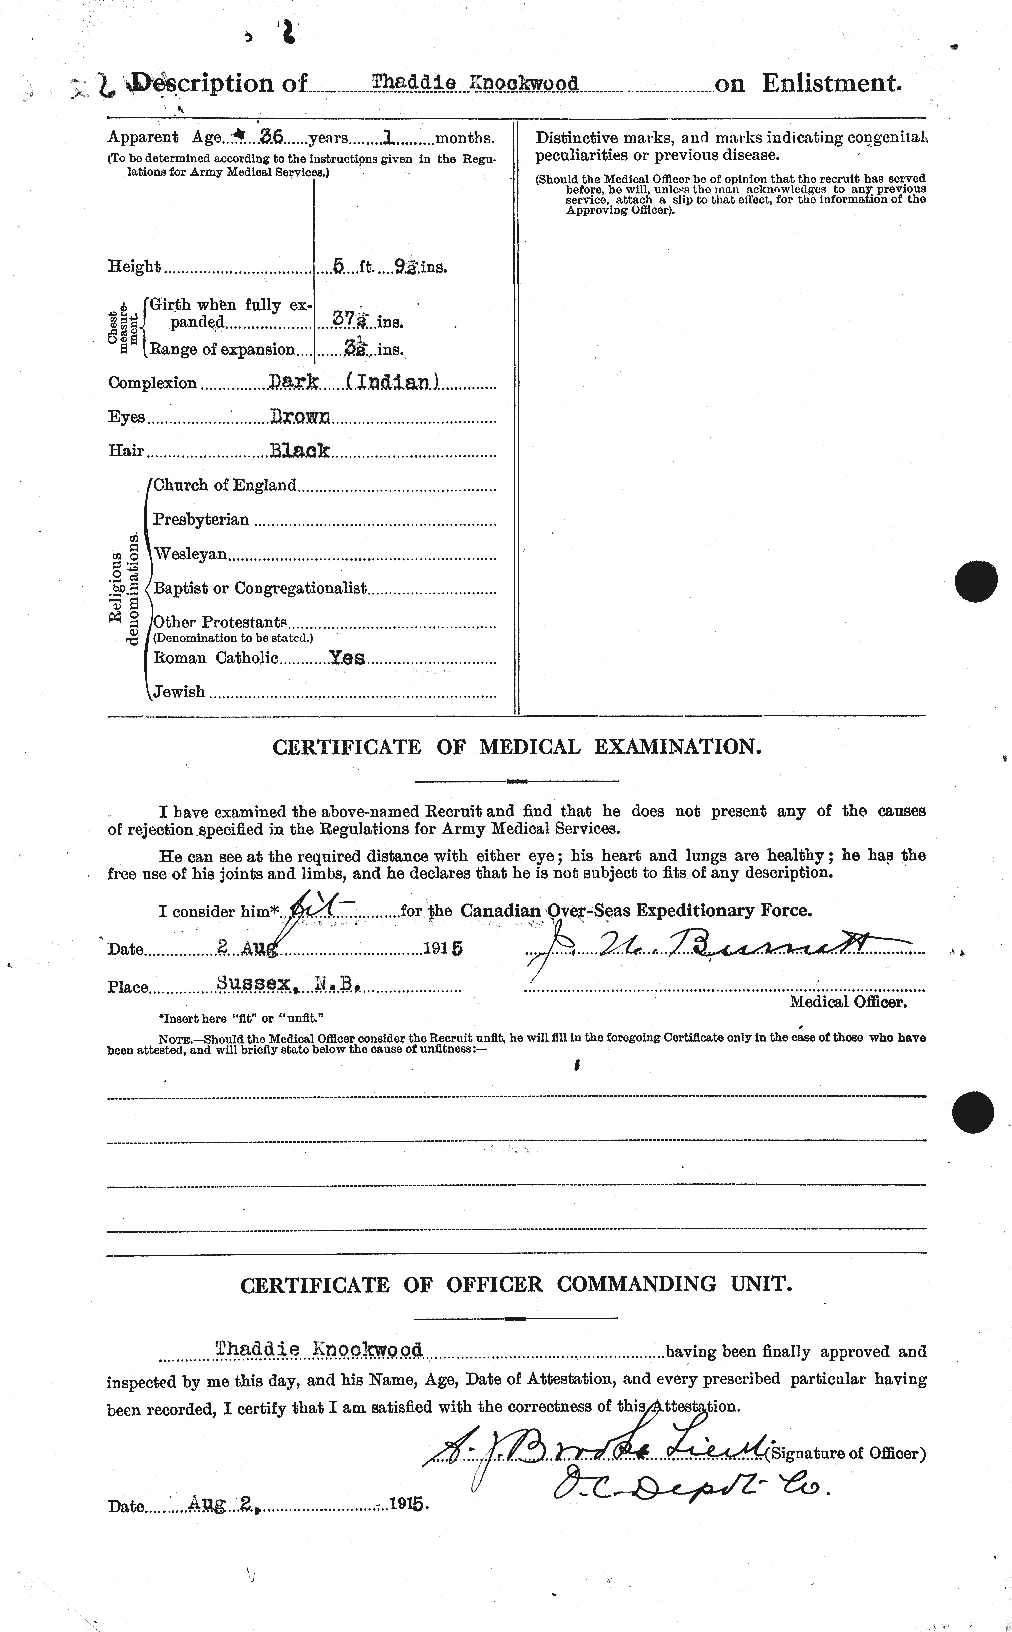 Personnel Records of the First World War - CEF 440194b